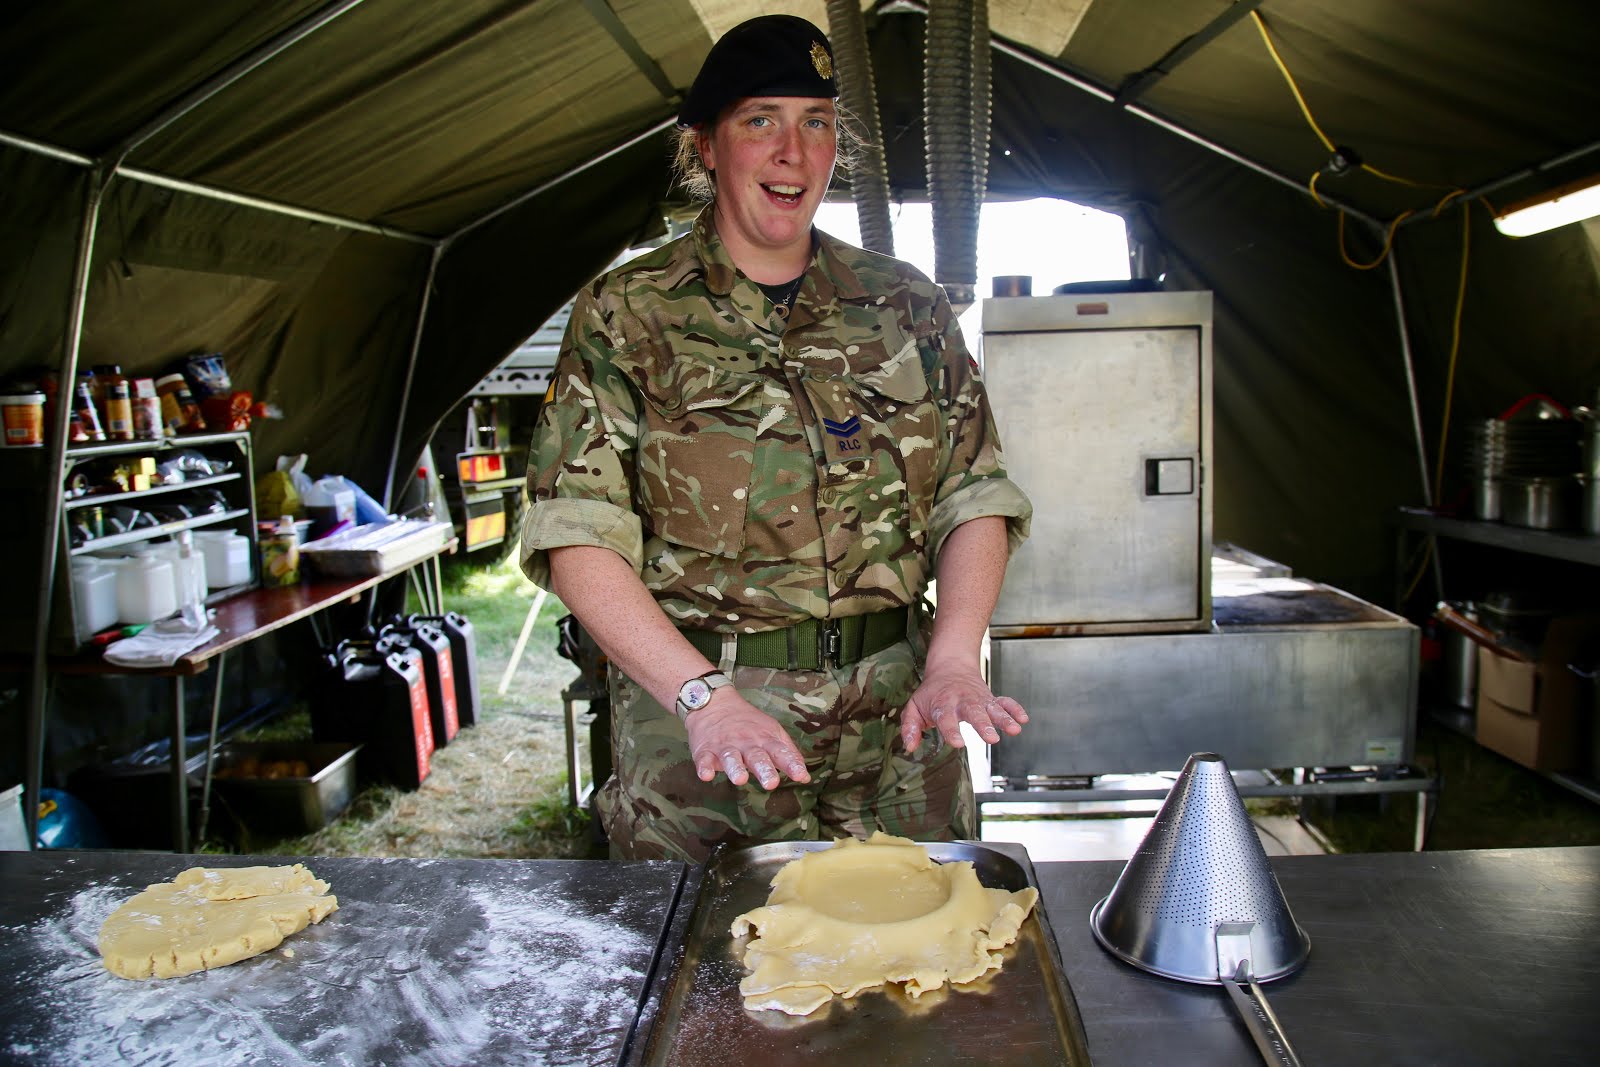 British Army catering, visiting 167 Catering corps in Grantham